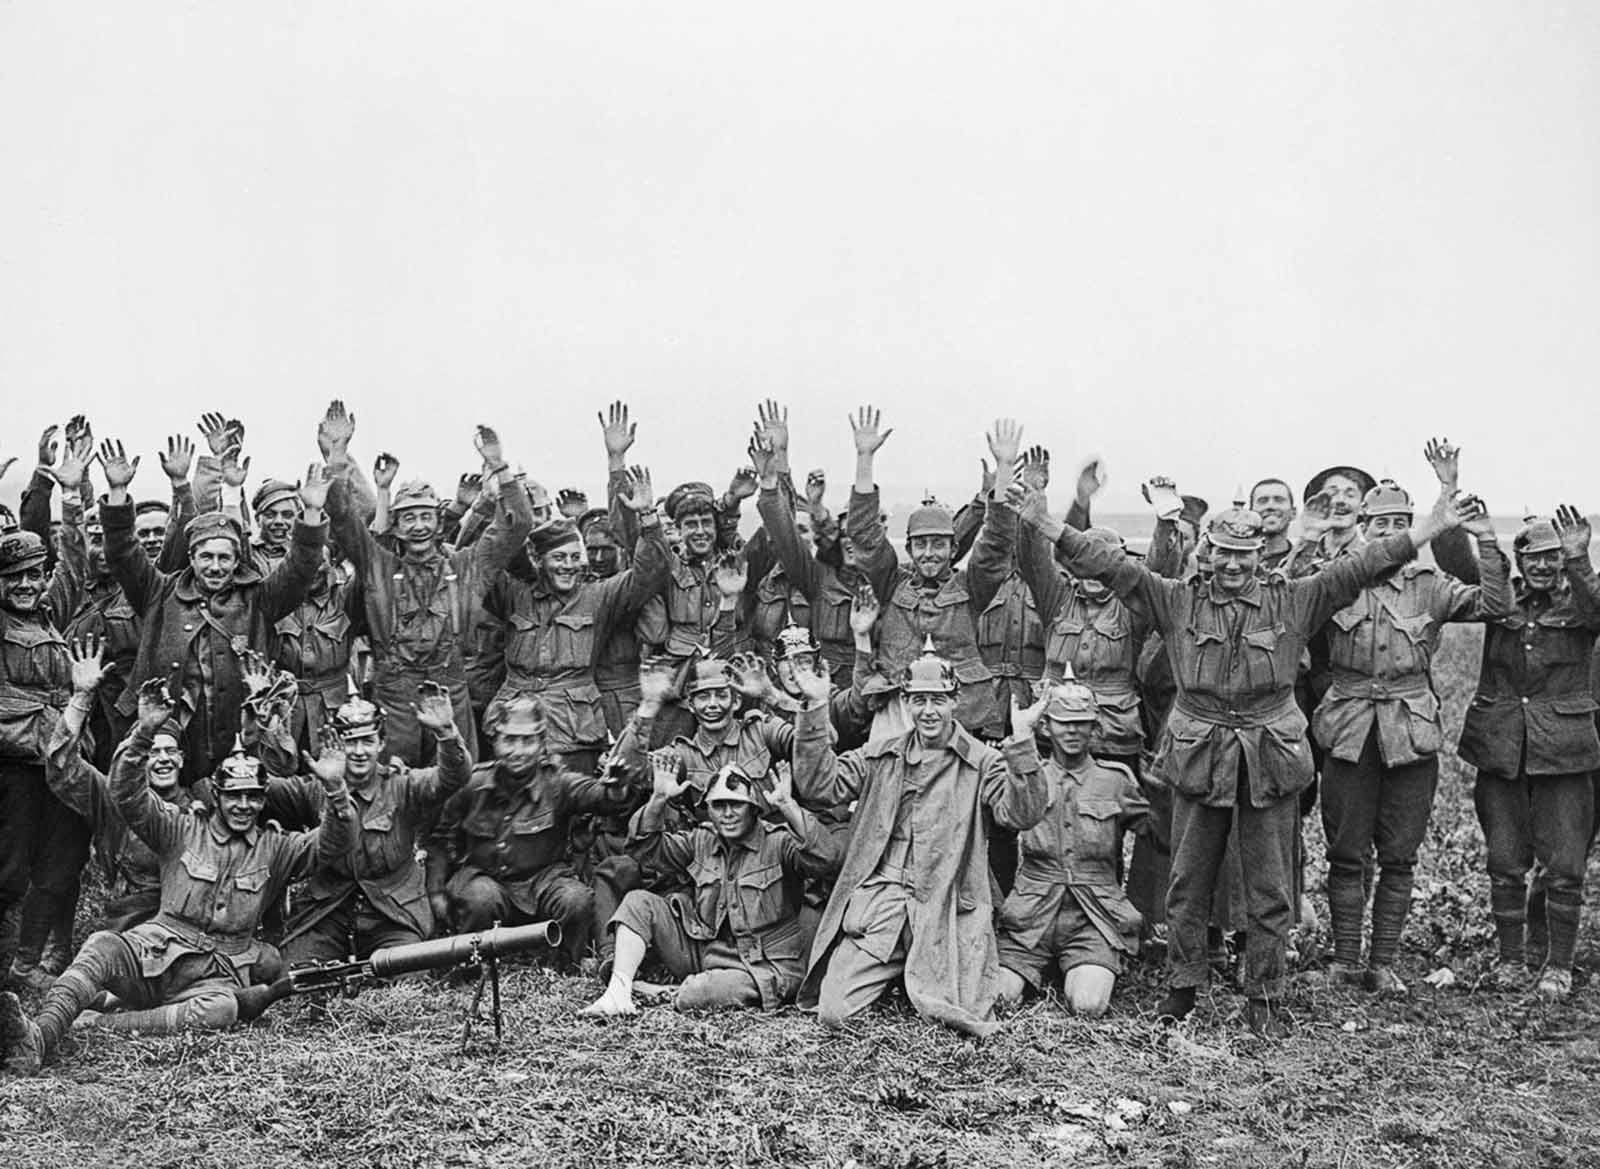 Men of the 1st Anzac Division, some wearing German helmets, pose for the camera after fighting near Pozieres Ridge. July 23, 1916.